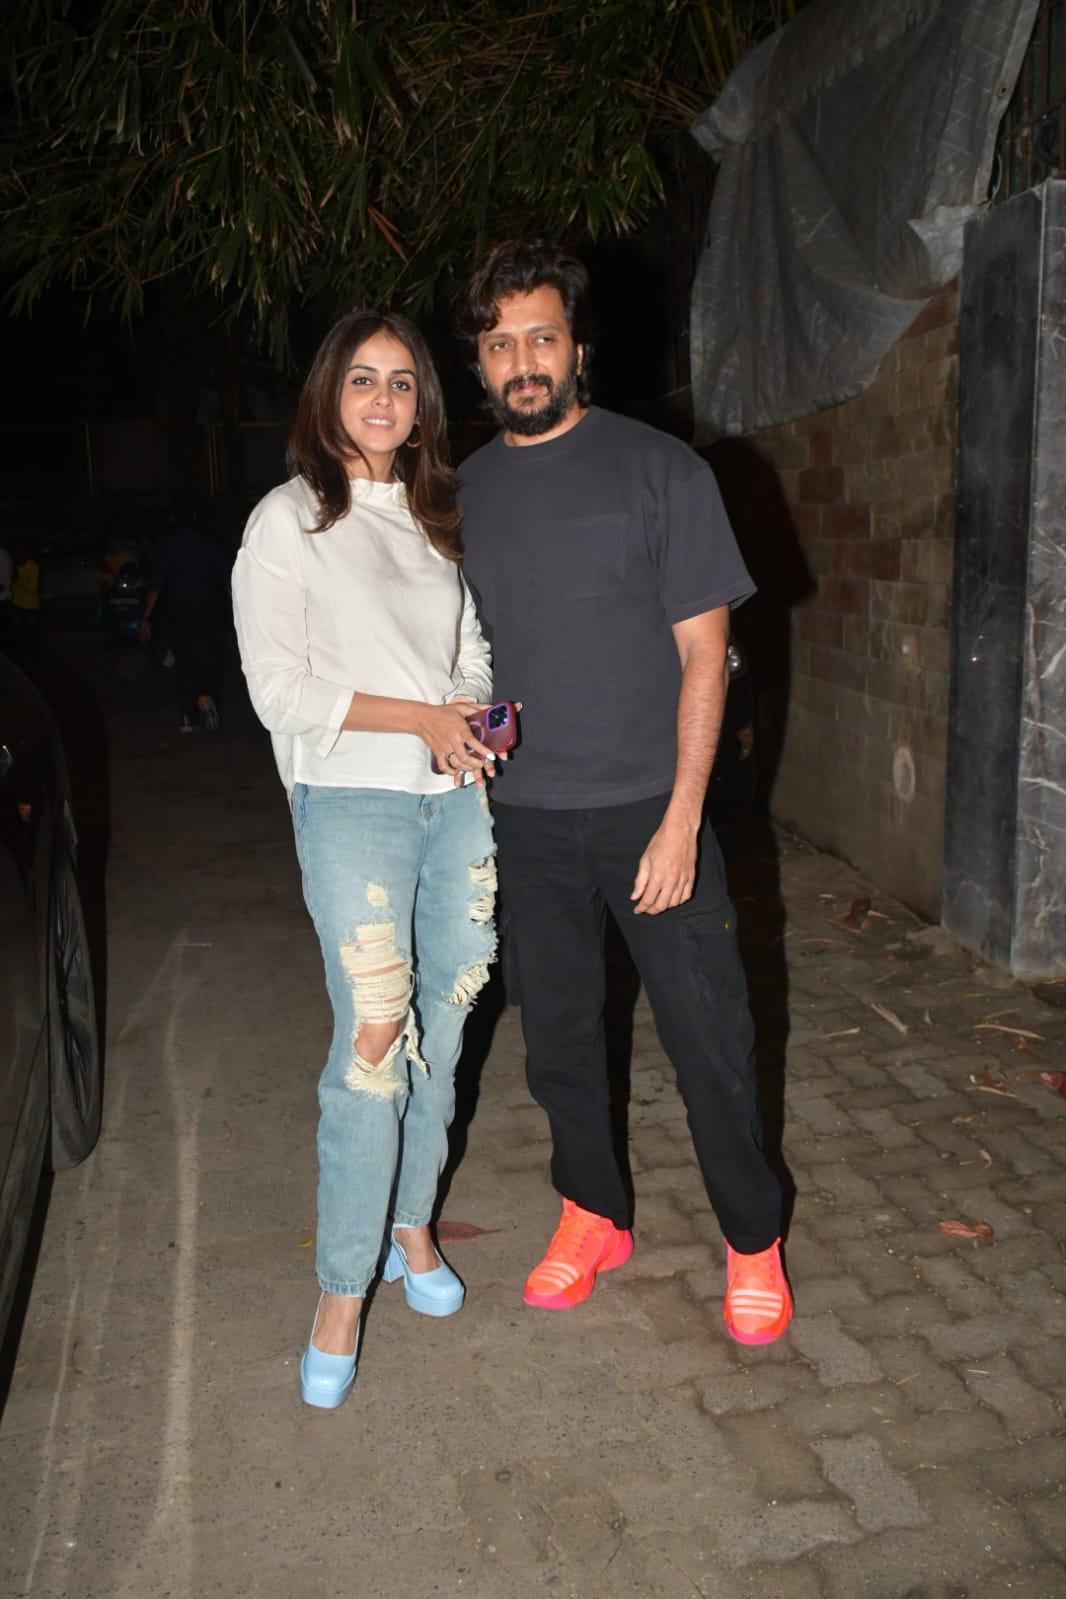 Power couple, Genelia D'Souza and Riteish Deshmukh were spotted together in the city